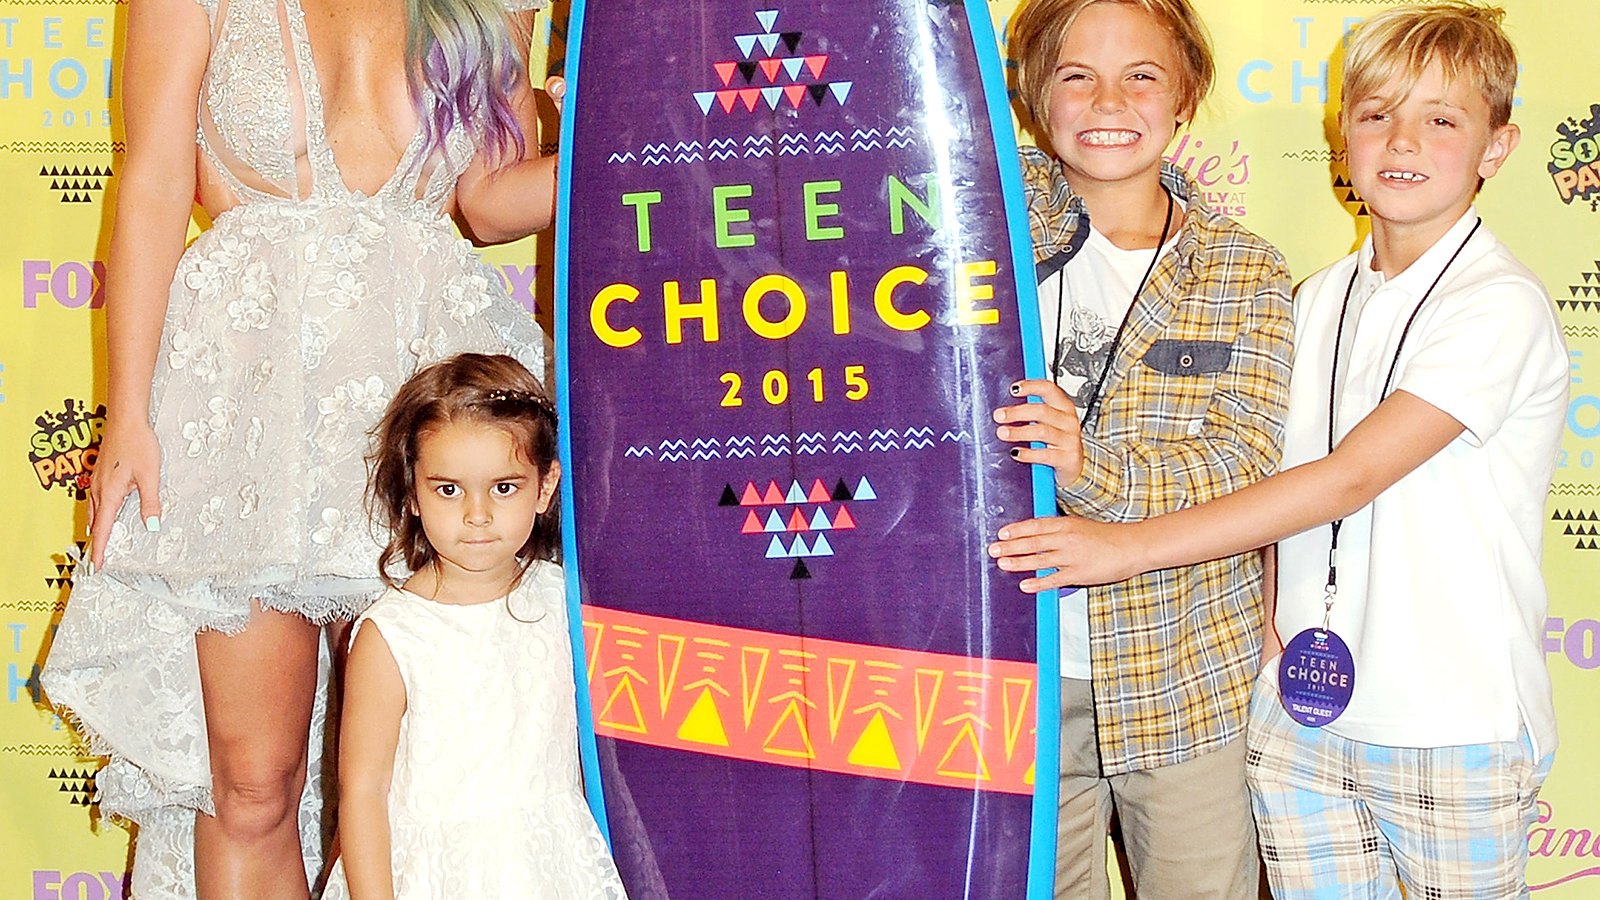 Britney Spears poses with her kids at the Teen Choice Awards 2015